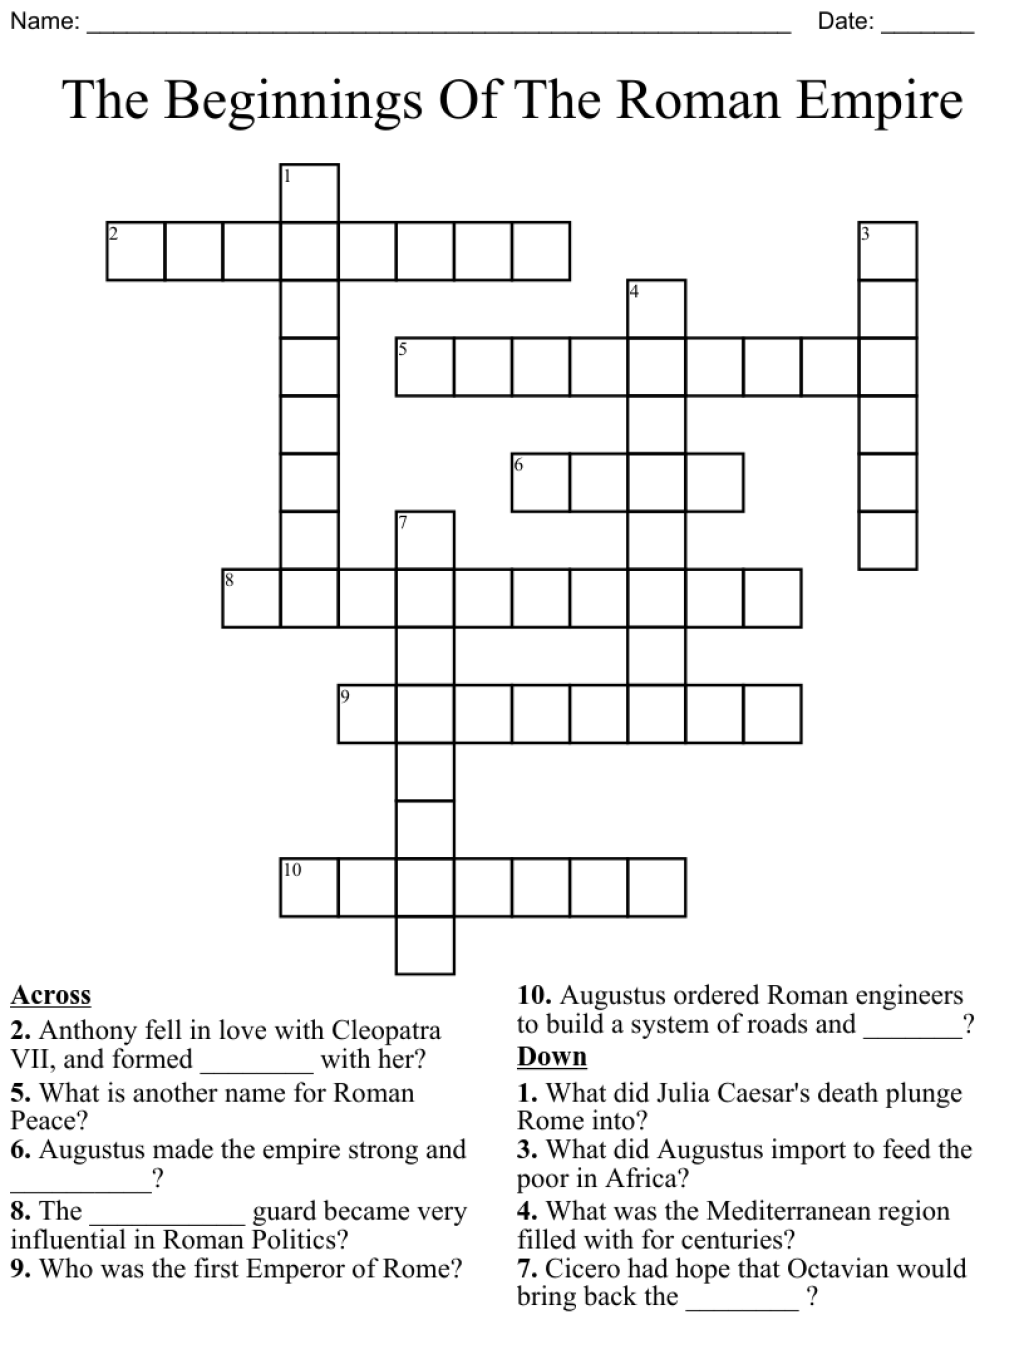 Picture of: The Beginnings Of The Roman Empire Crossword – WordMint